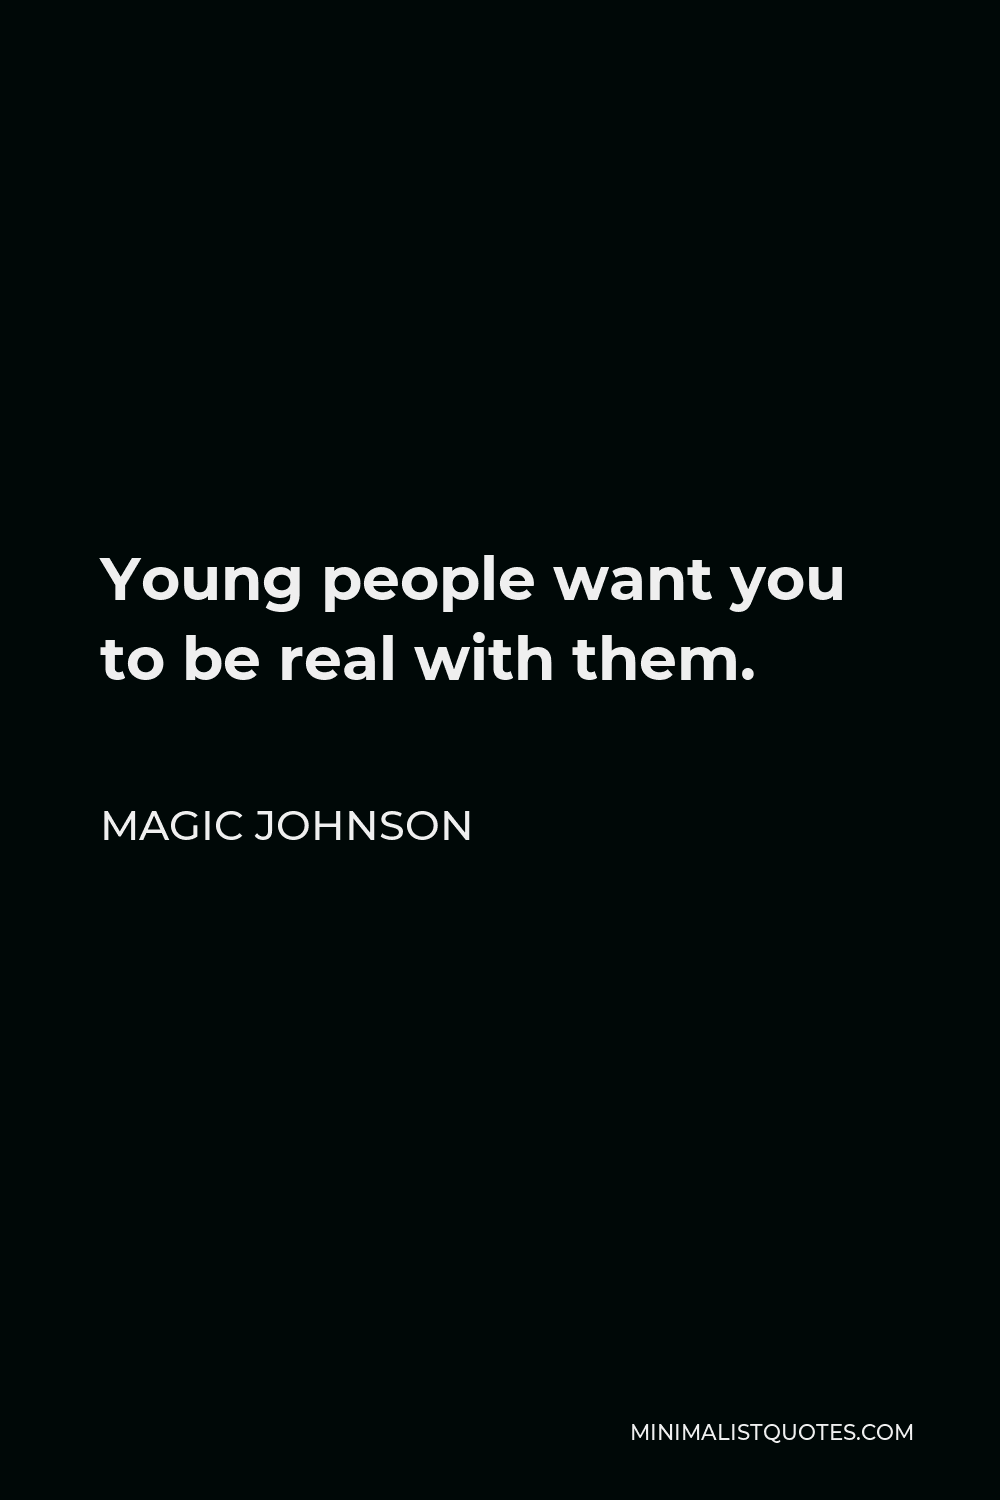 Magic Johnson Quote - Young people want you to be real with them.